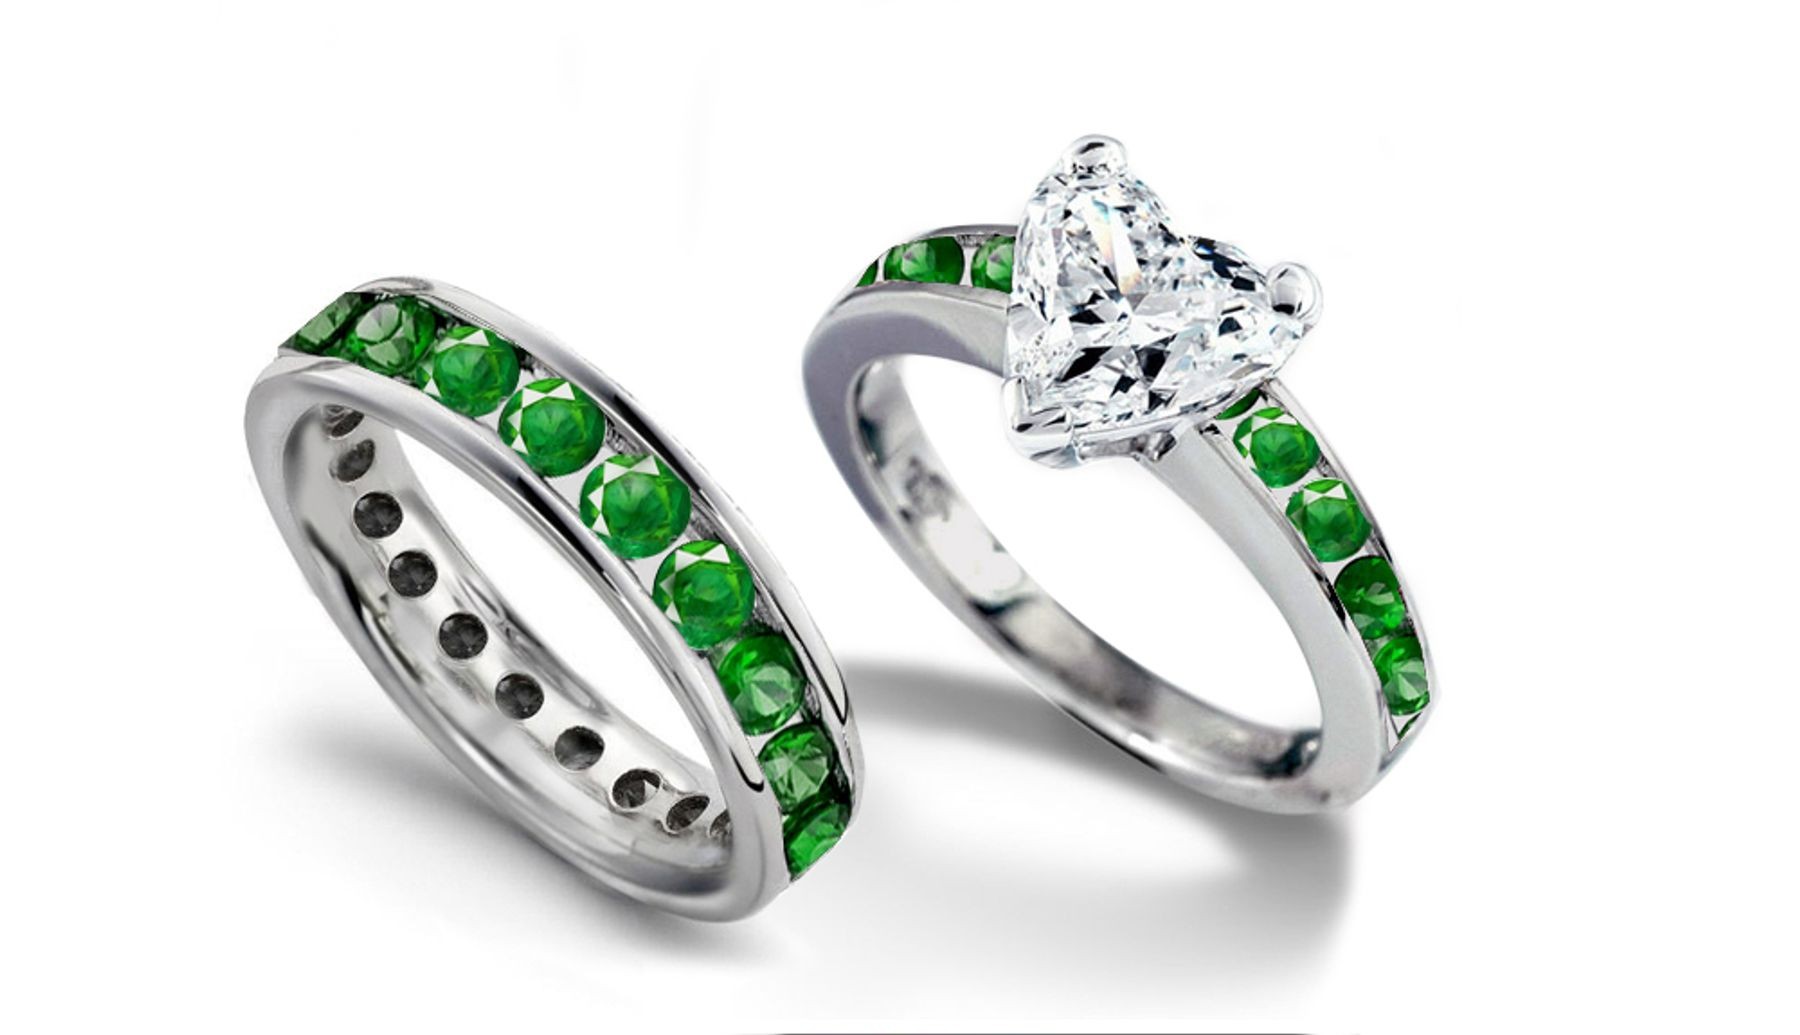 IN CURRENT STOCK: Solitaire Heart Diamond & Emerald Ring & Eternity Band